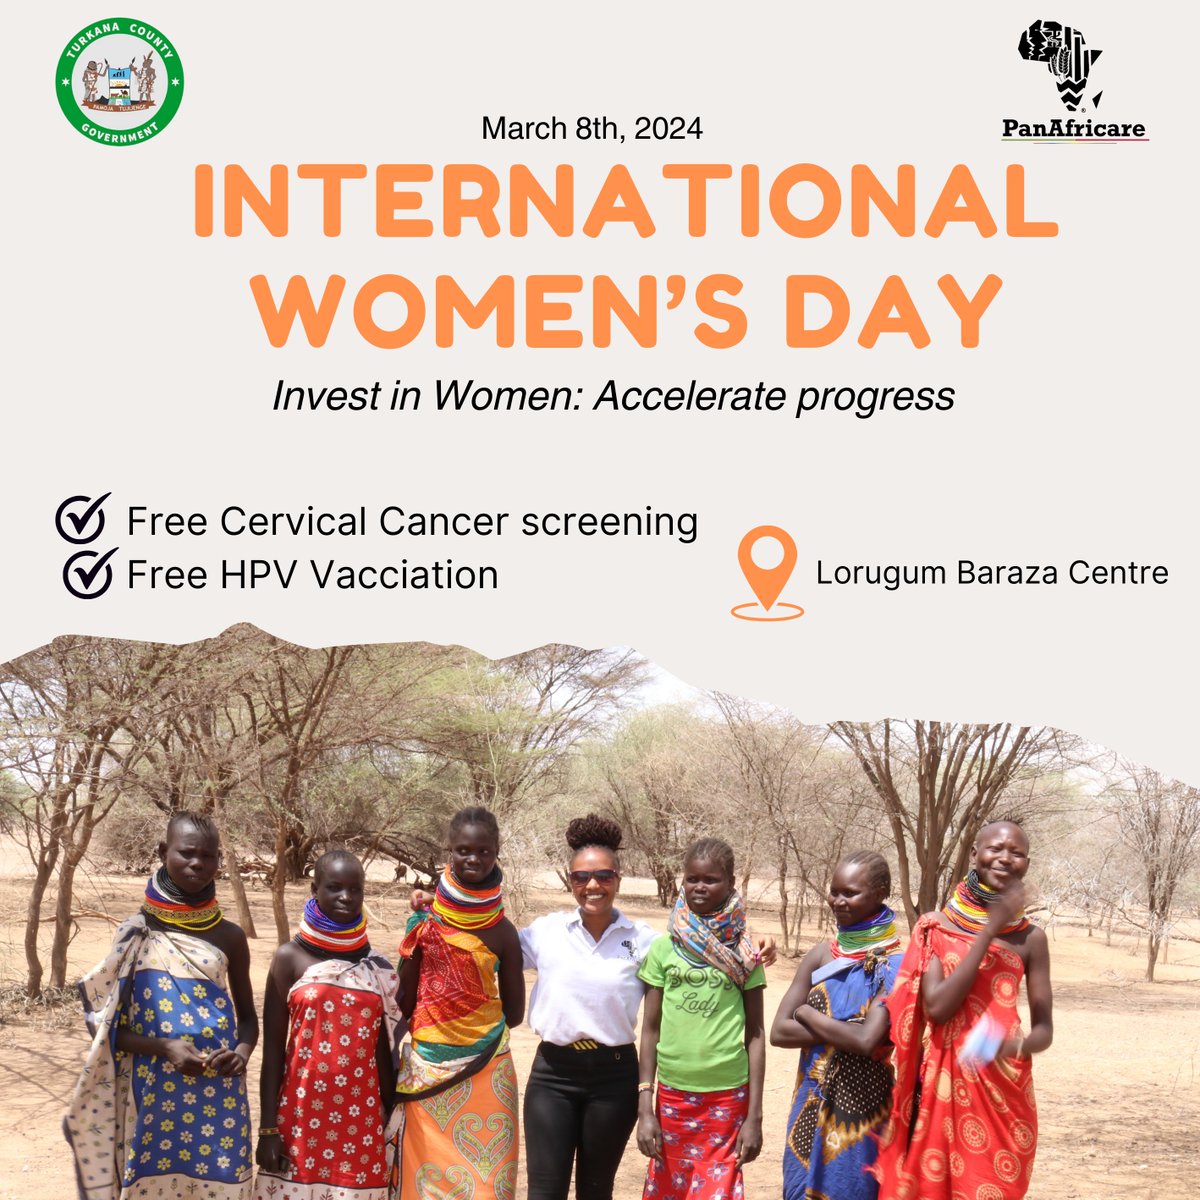 Join us tomorrow at Lorugum Baraza Centre as we celebrate the #InternationalWomensDay. Free cervical cancer screening and HPV vaccination at the venue. Let us all invest in women to accelerate progress! #IWD2024 #IWD